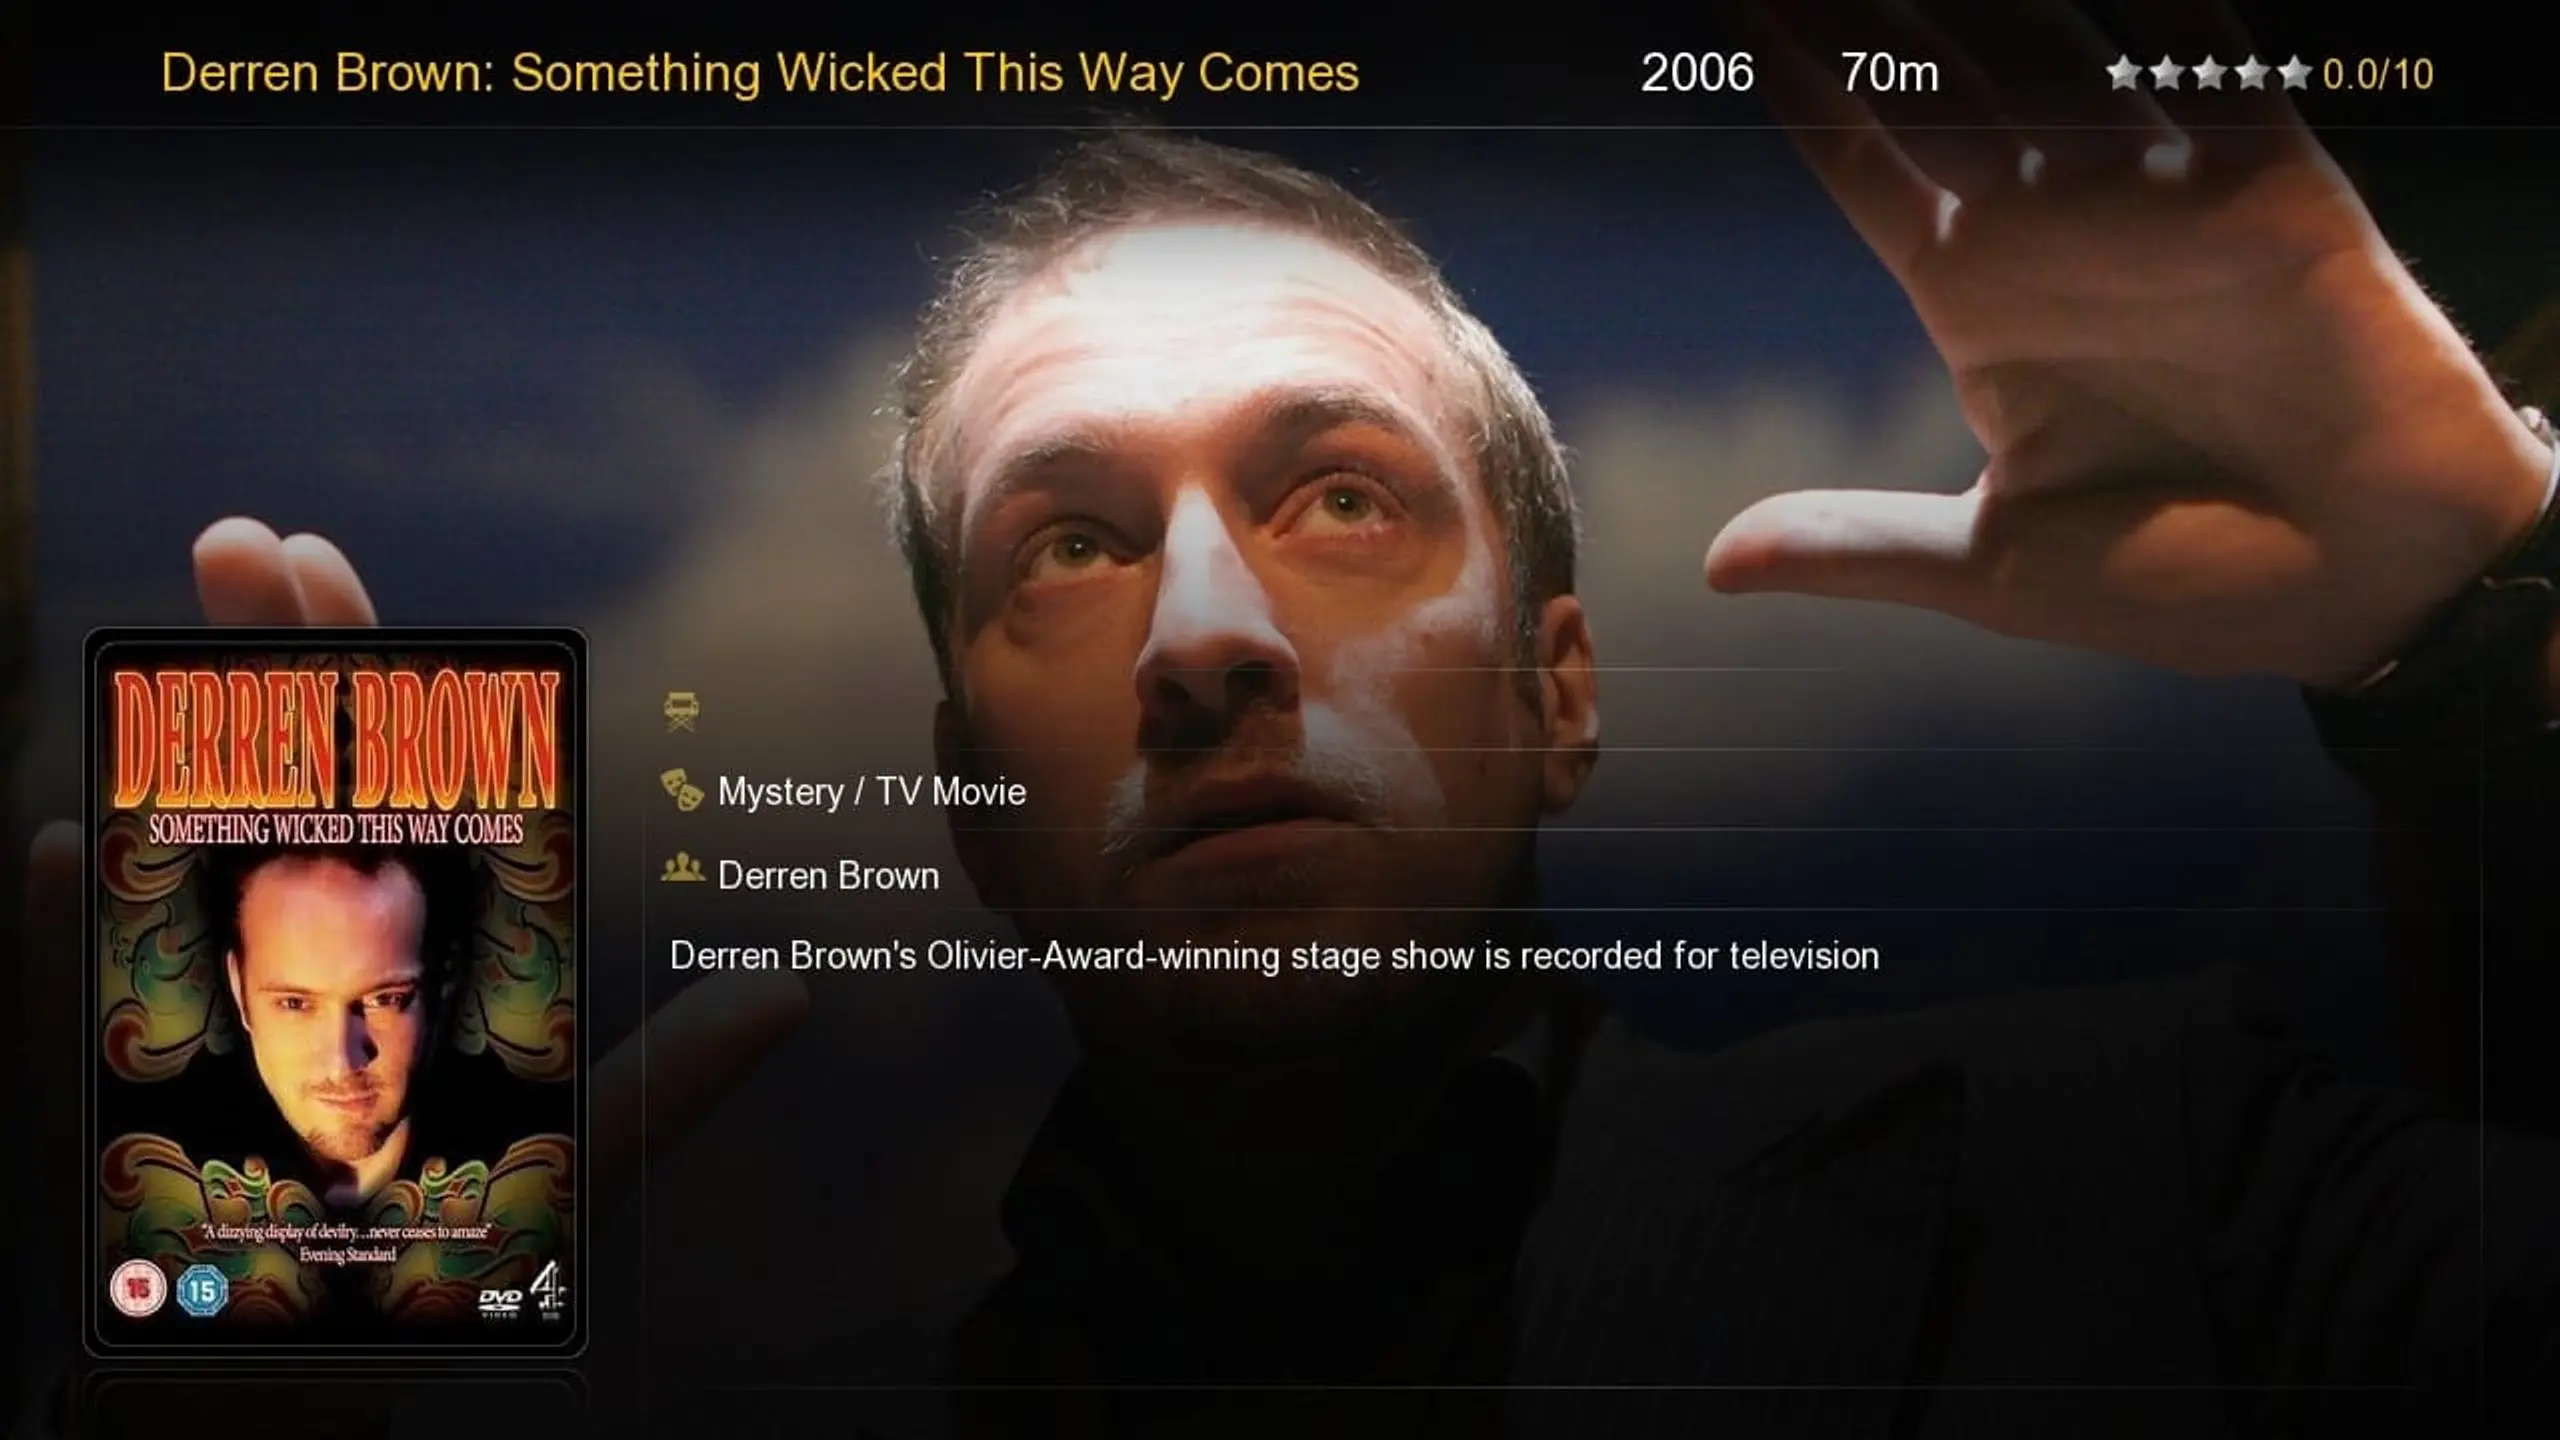 Derren Brown: Something Wicked This Way Comes